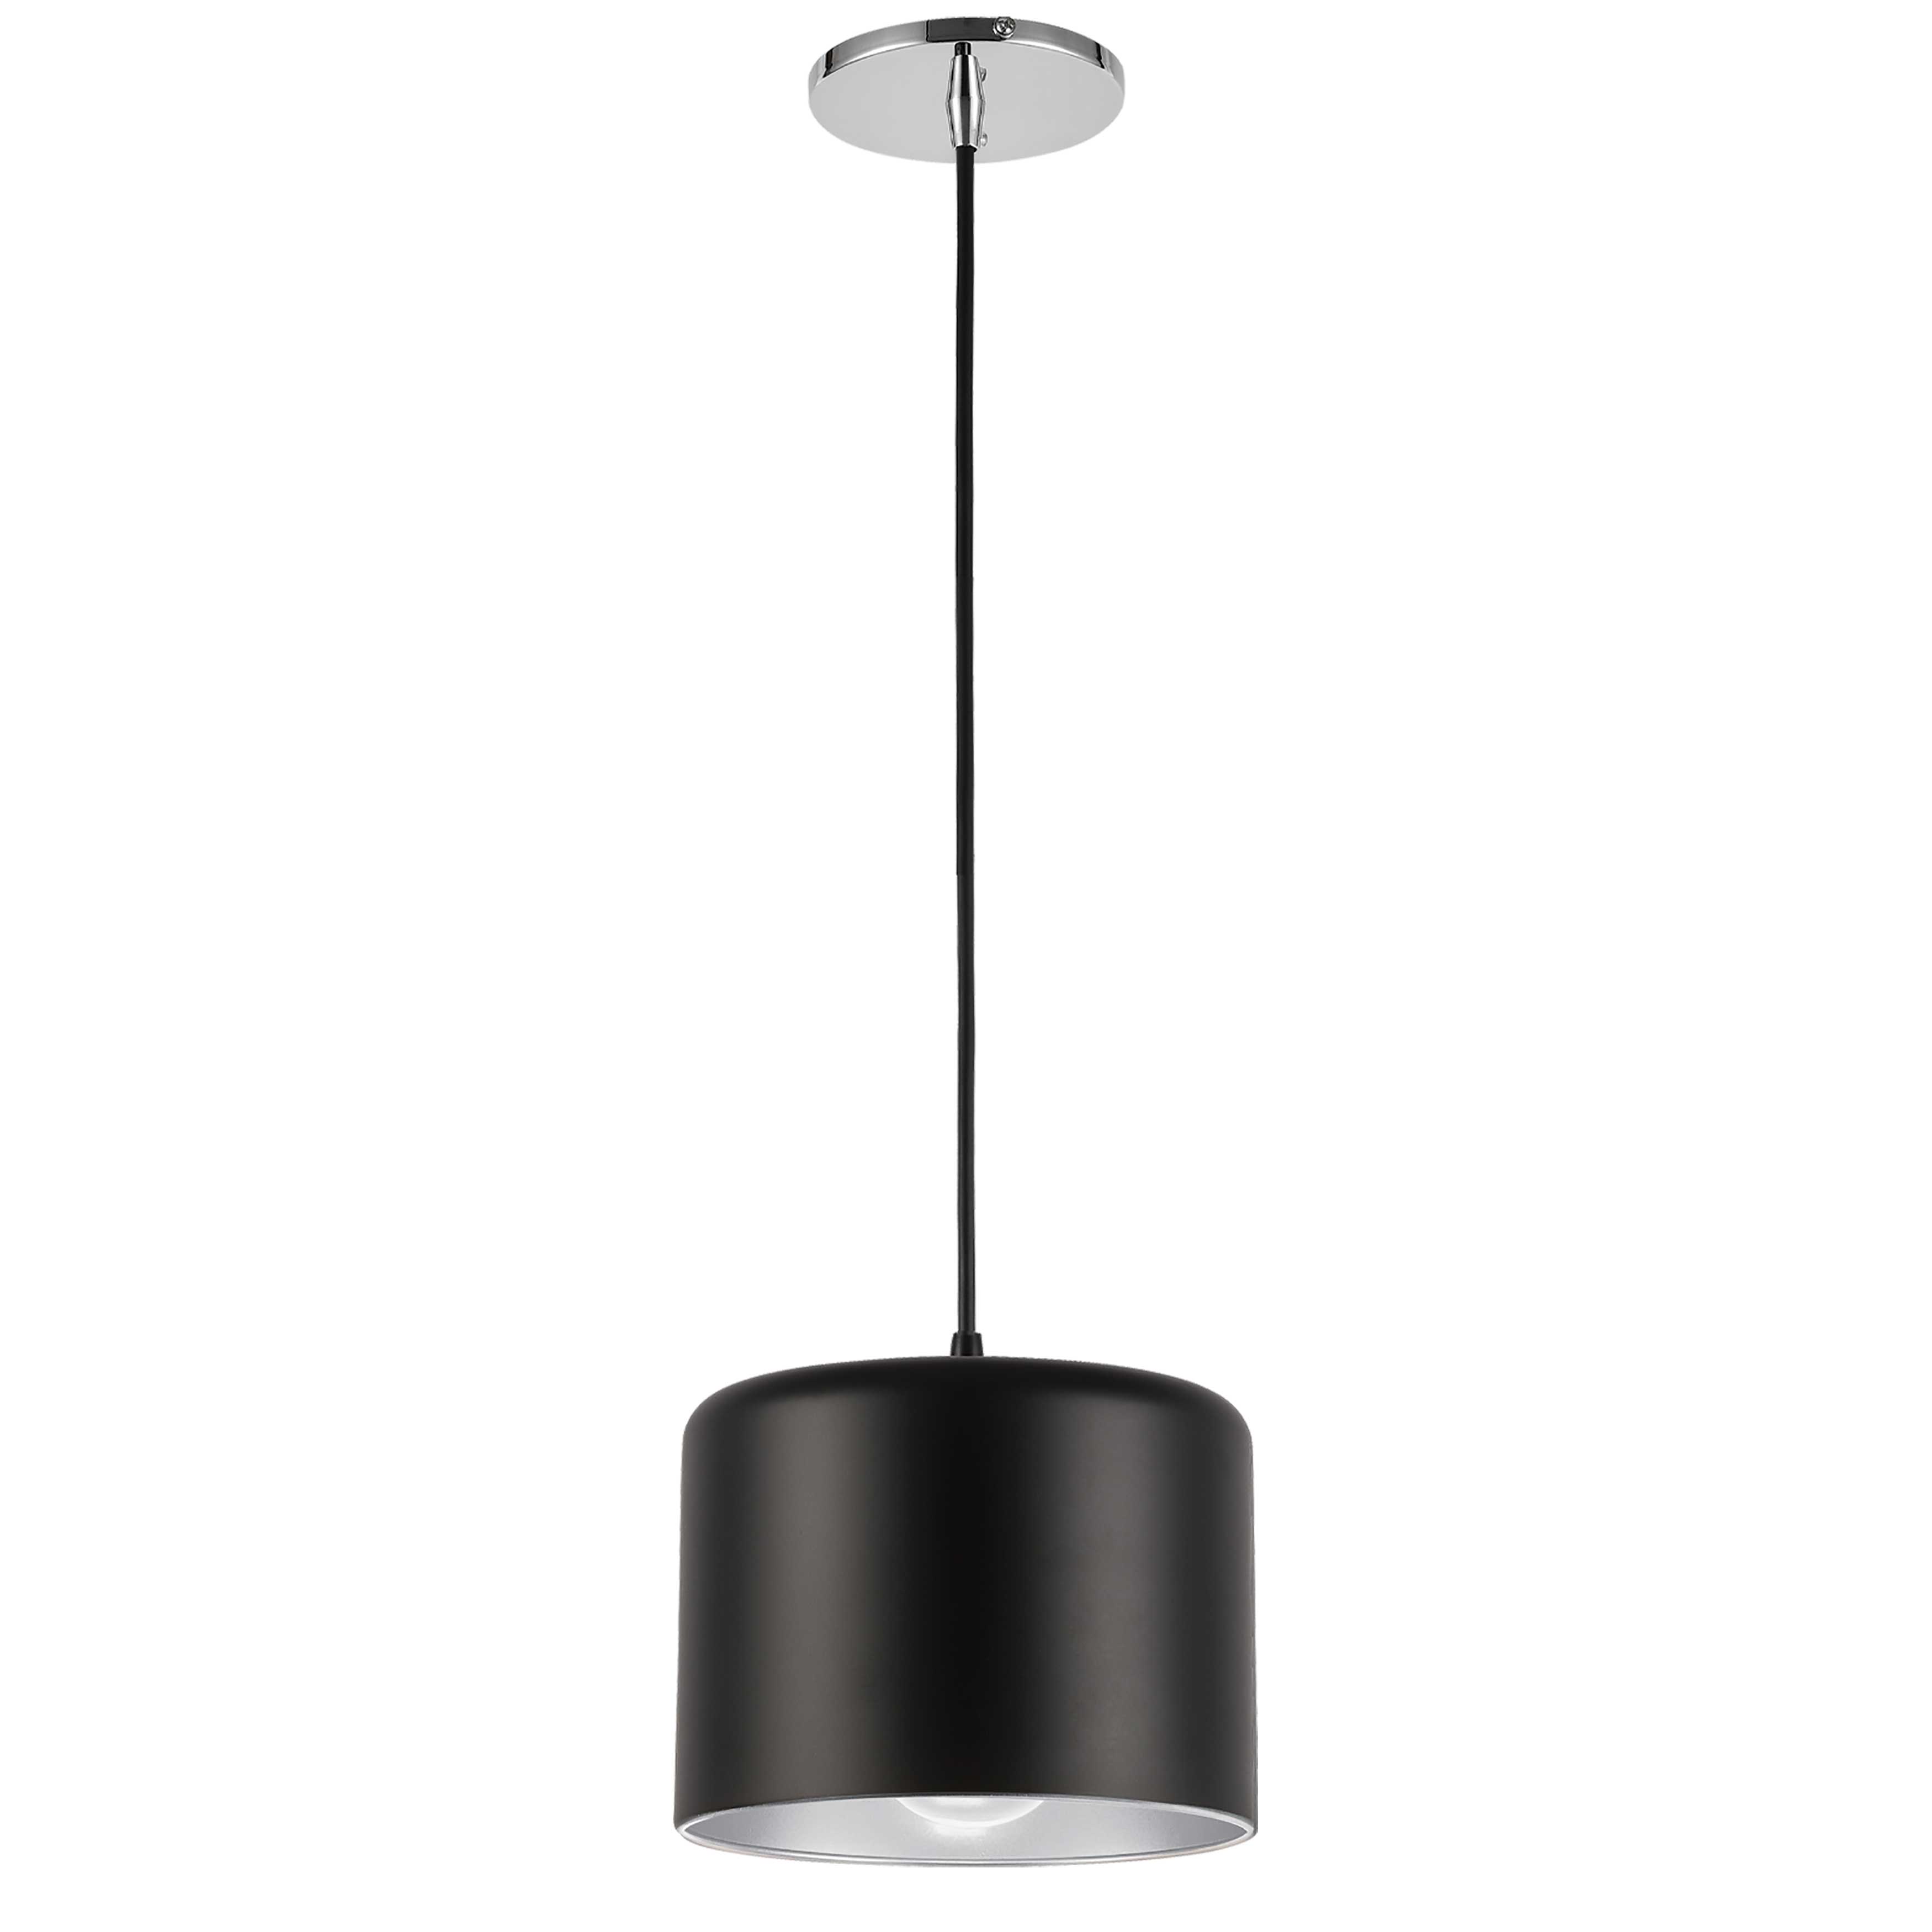 1 Light Incandescent Pendant, Polished Chrome with Matte Black & Silver Shade